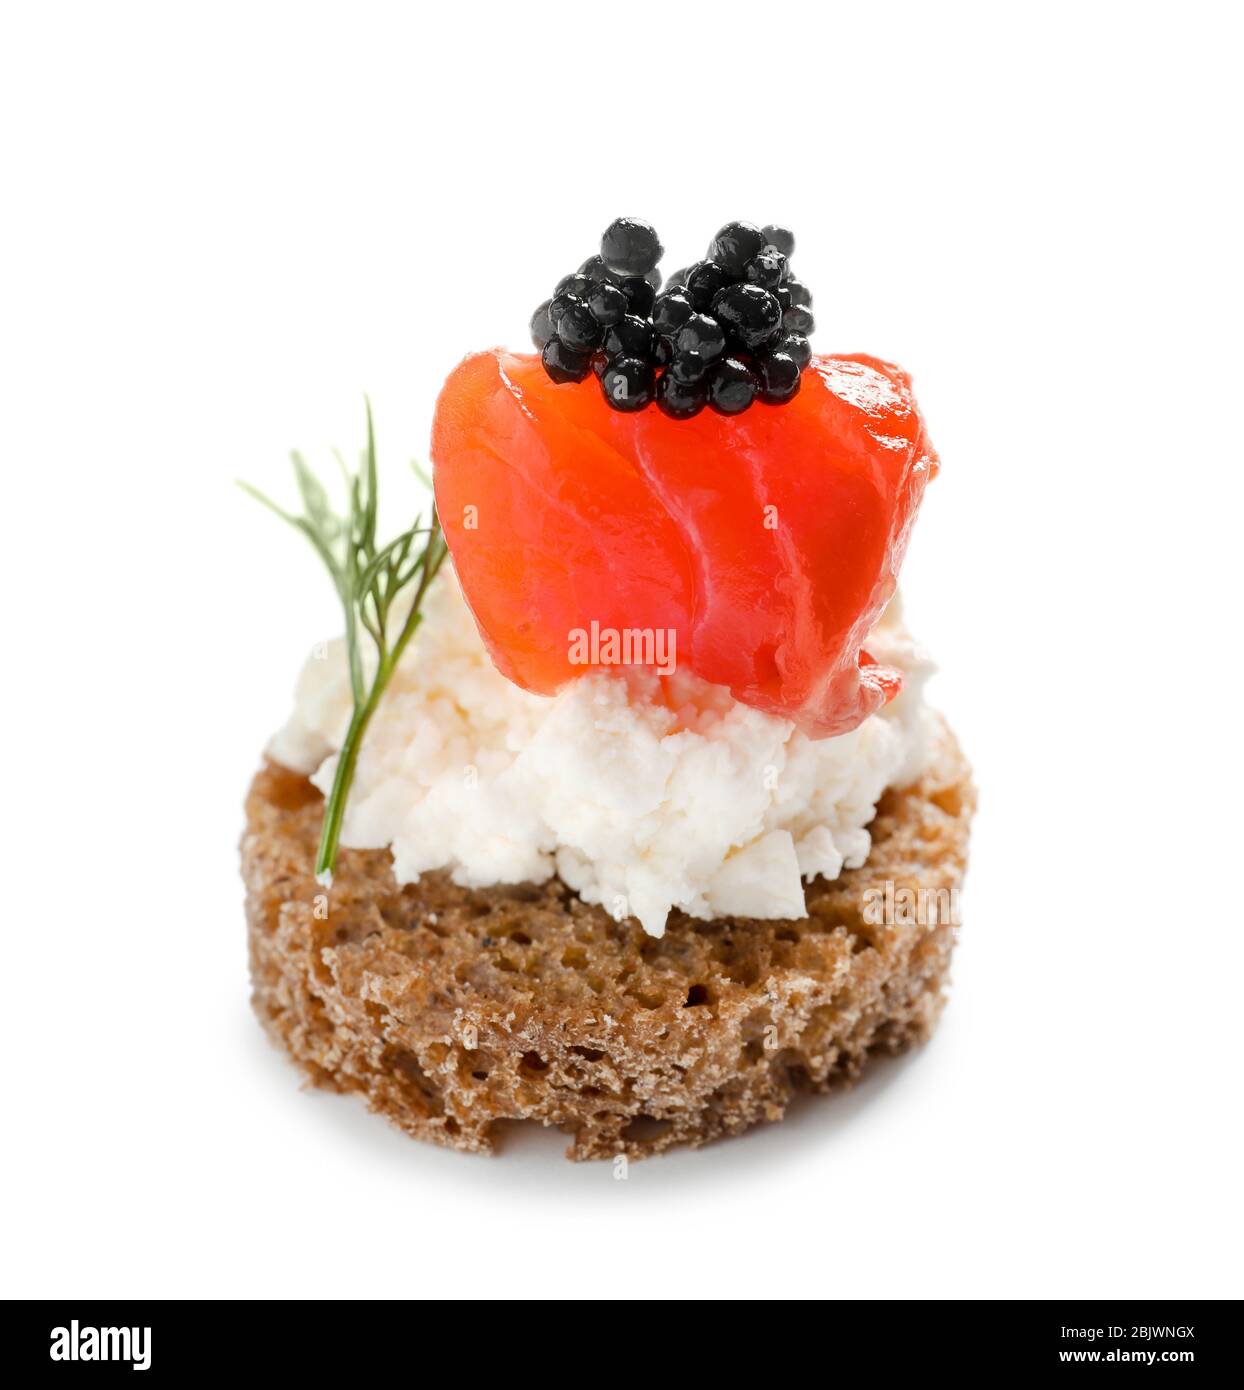 Delicious canape with black caviar on white background Stock Photo